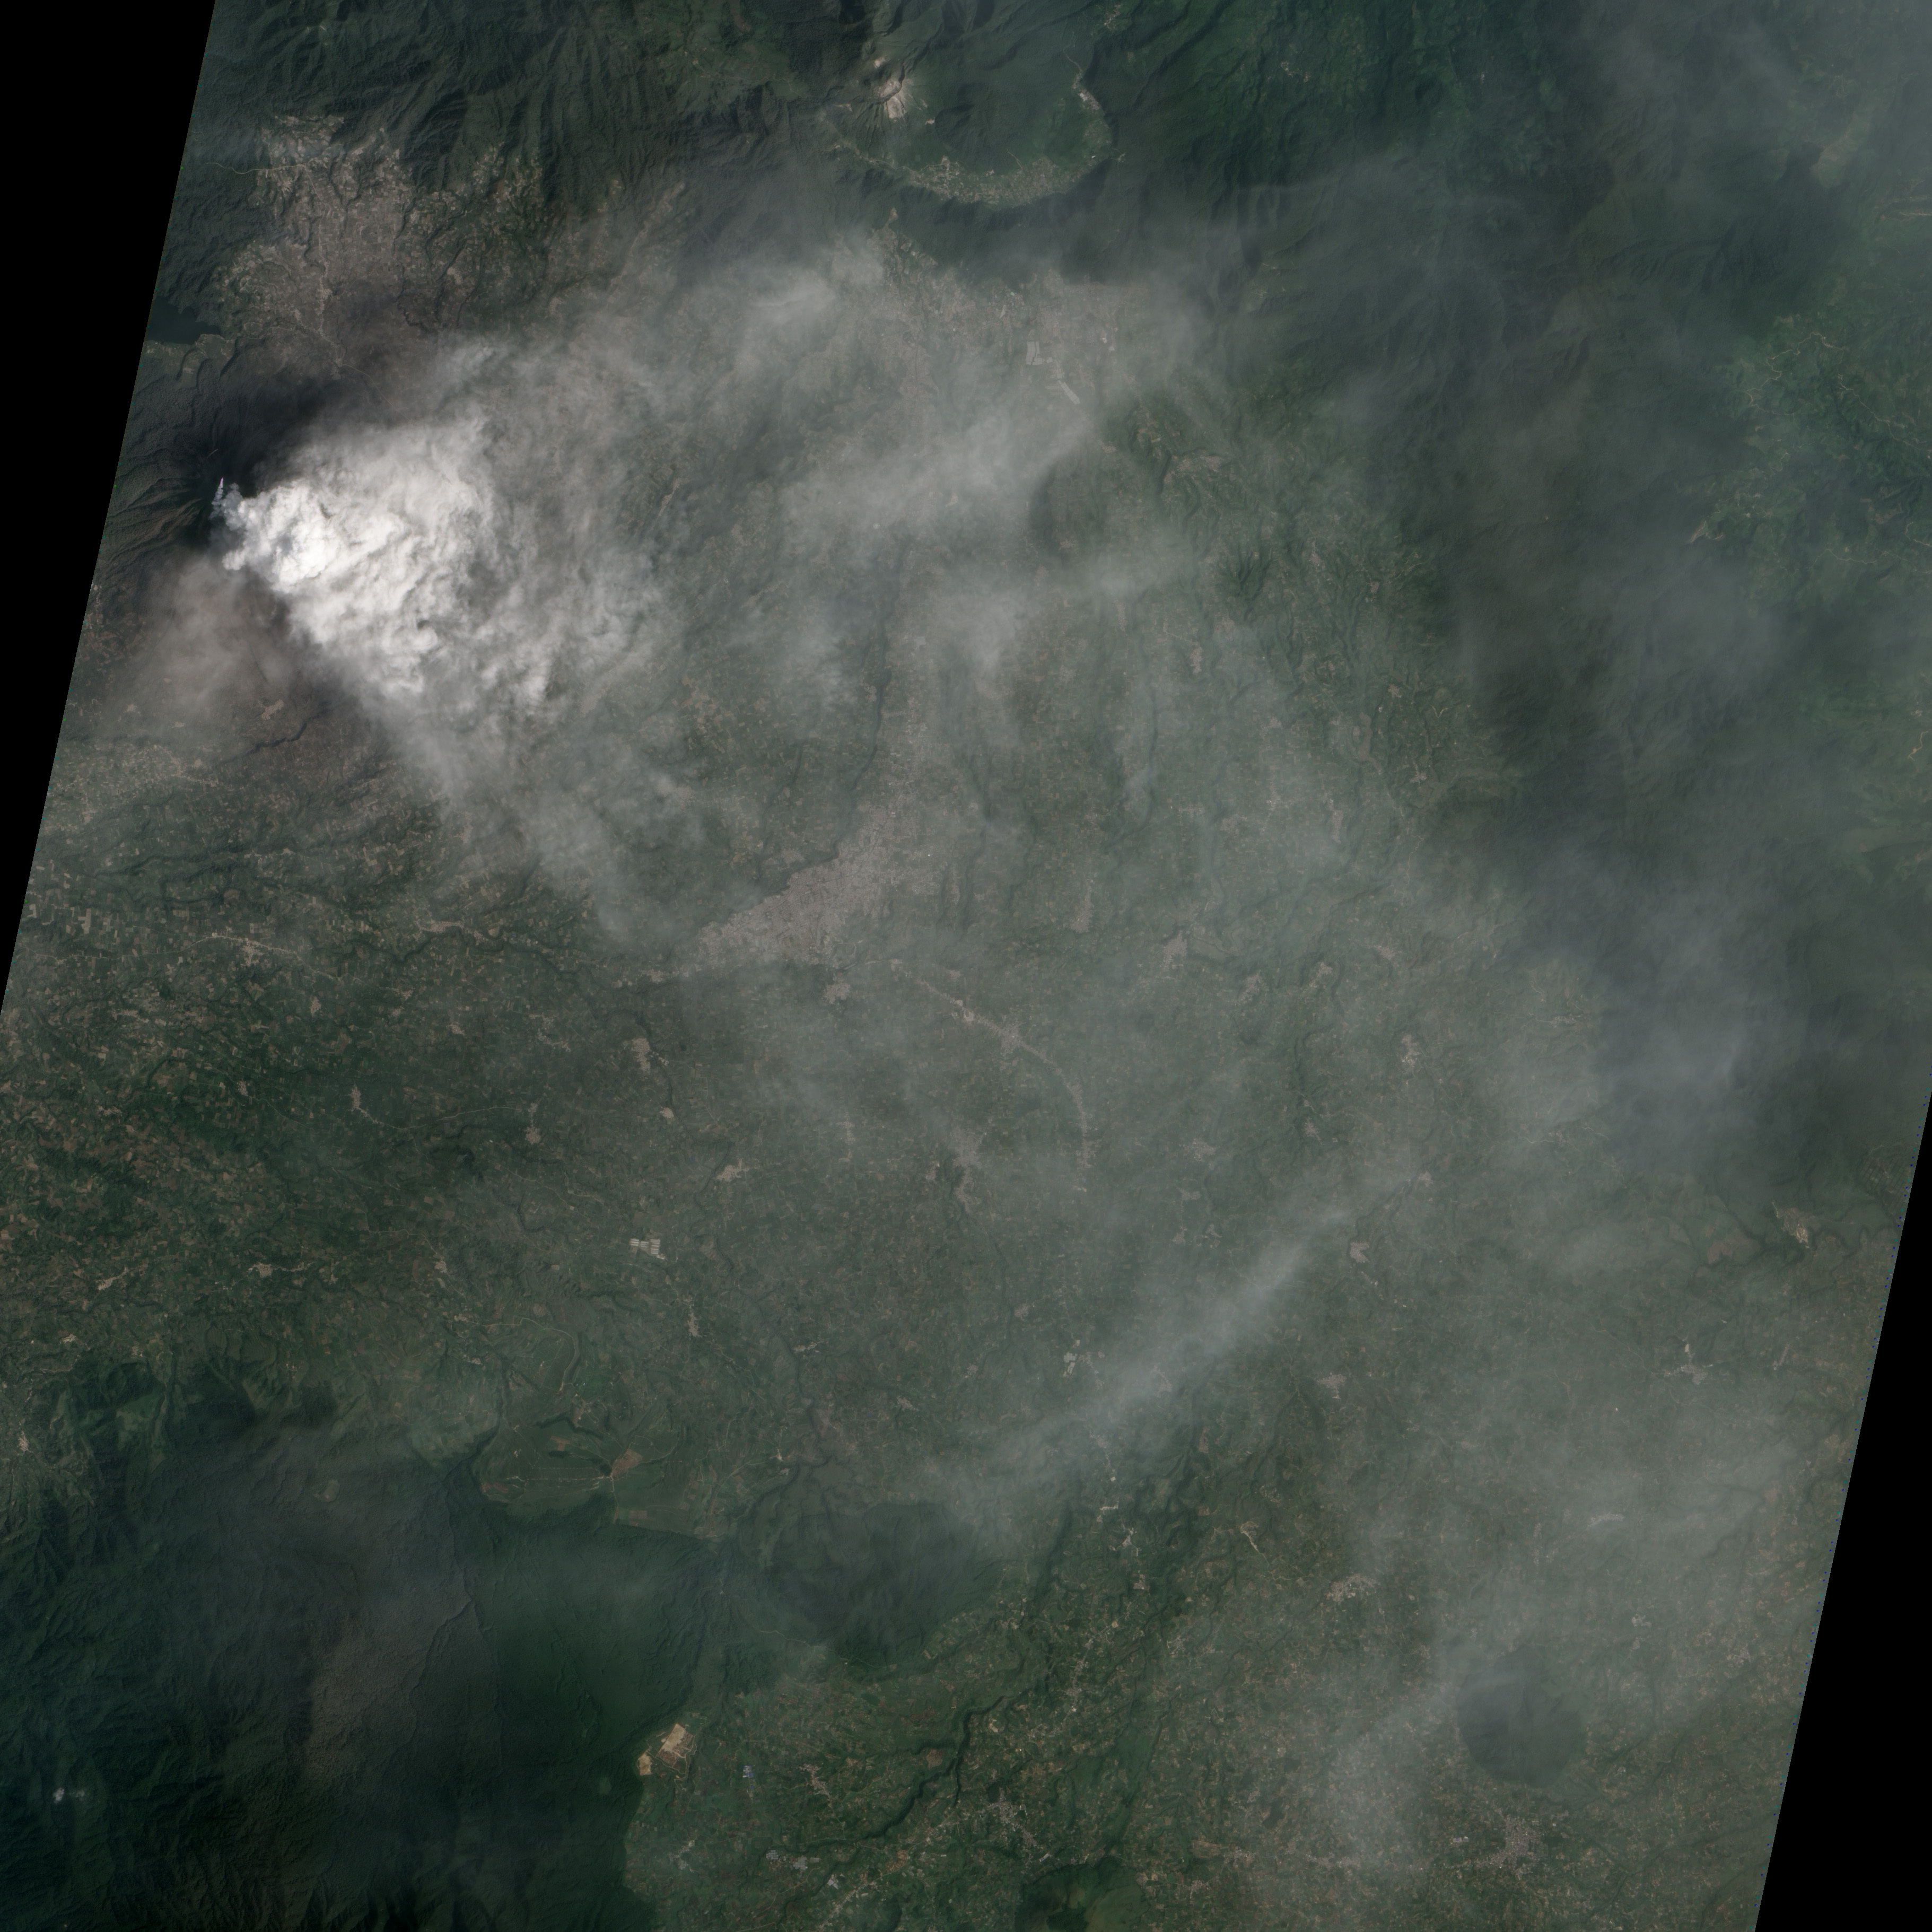 Smothering Ash Cloud from Sinabung Volcano - related image preview